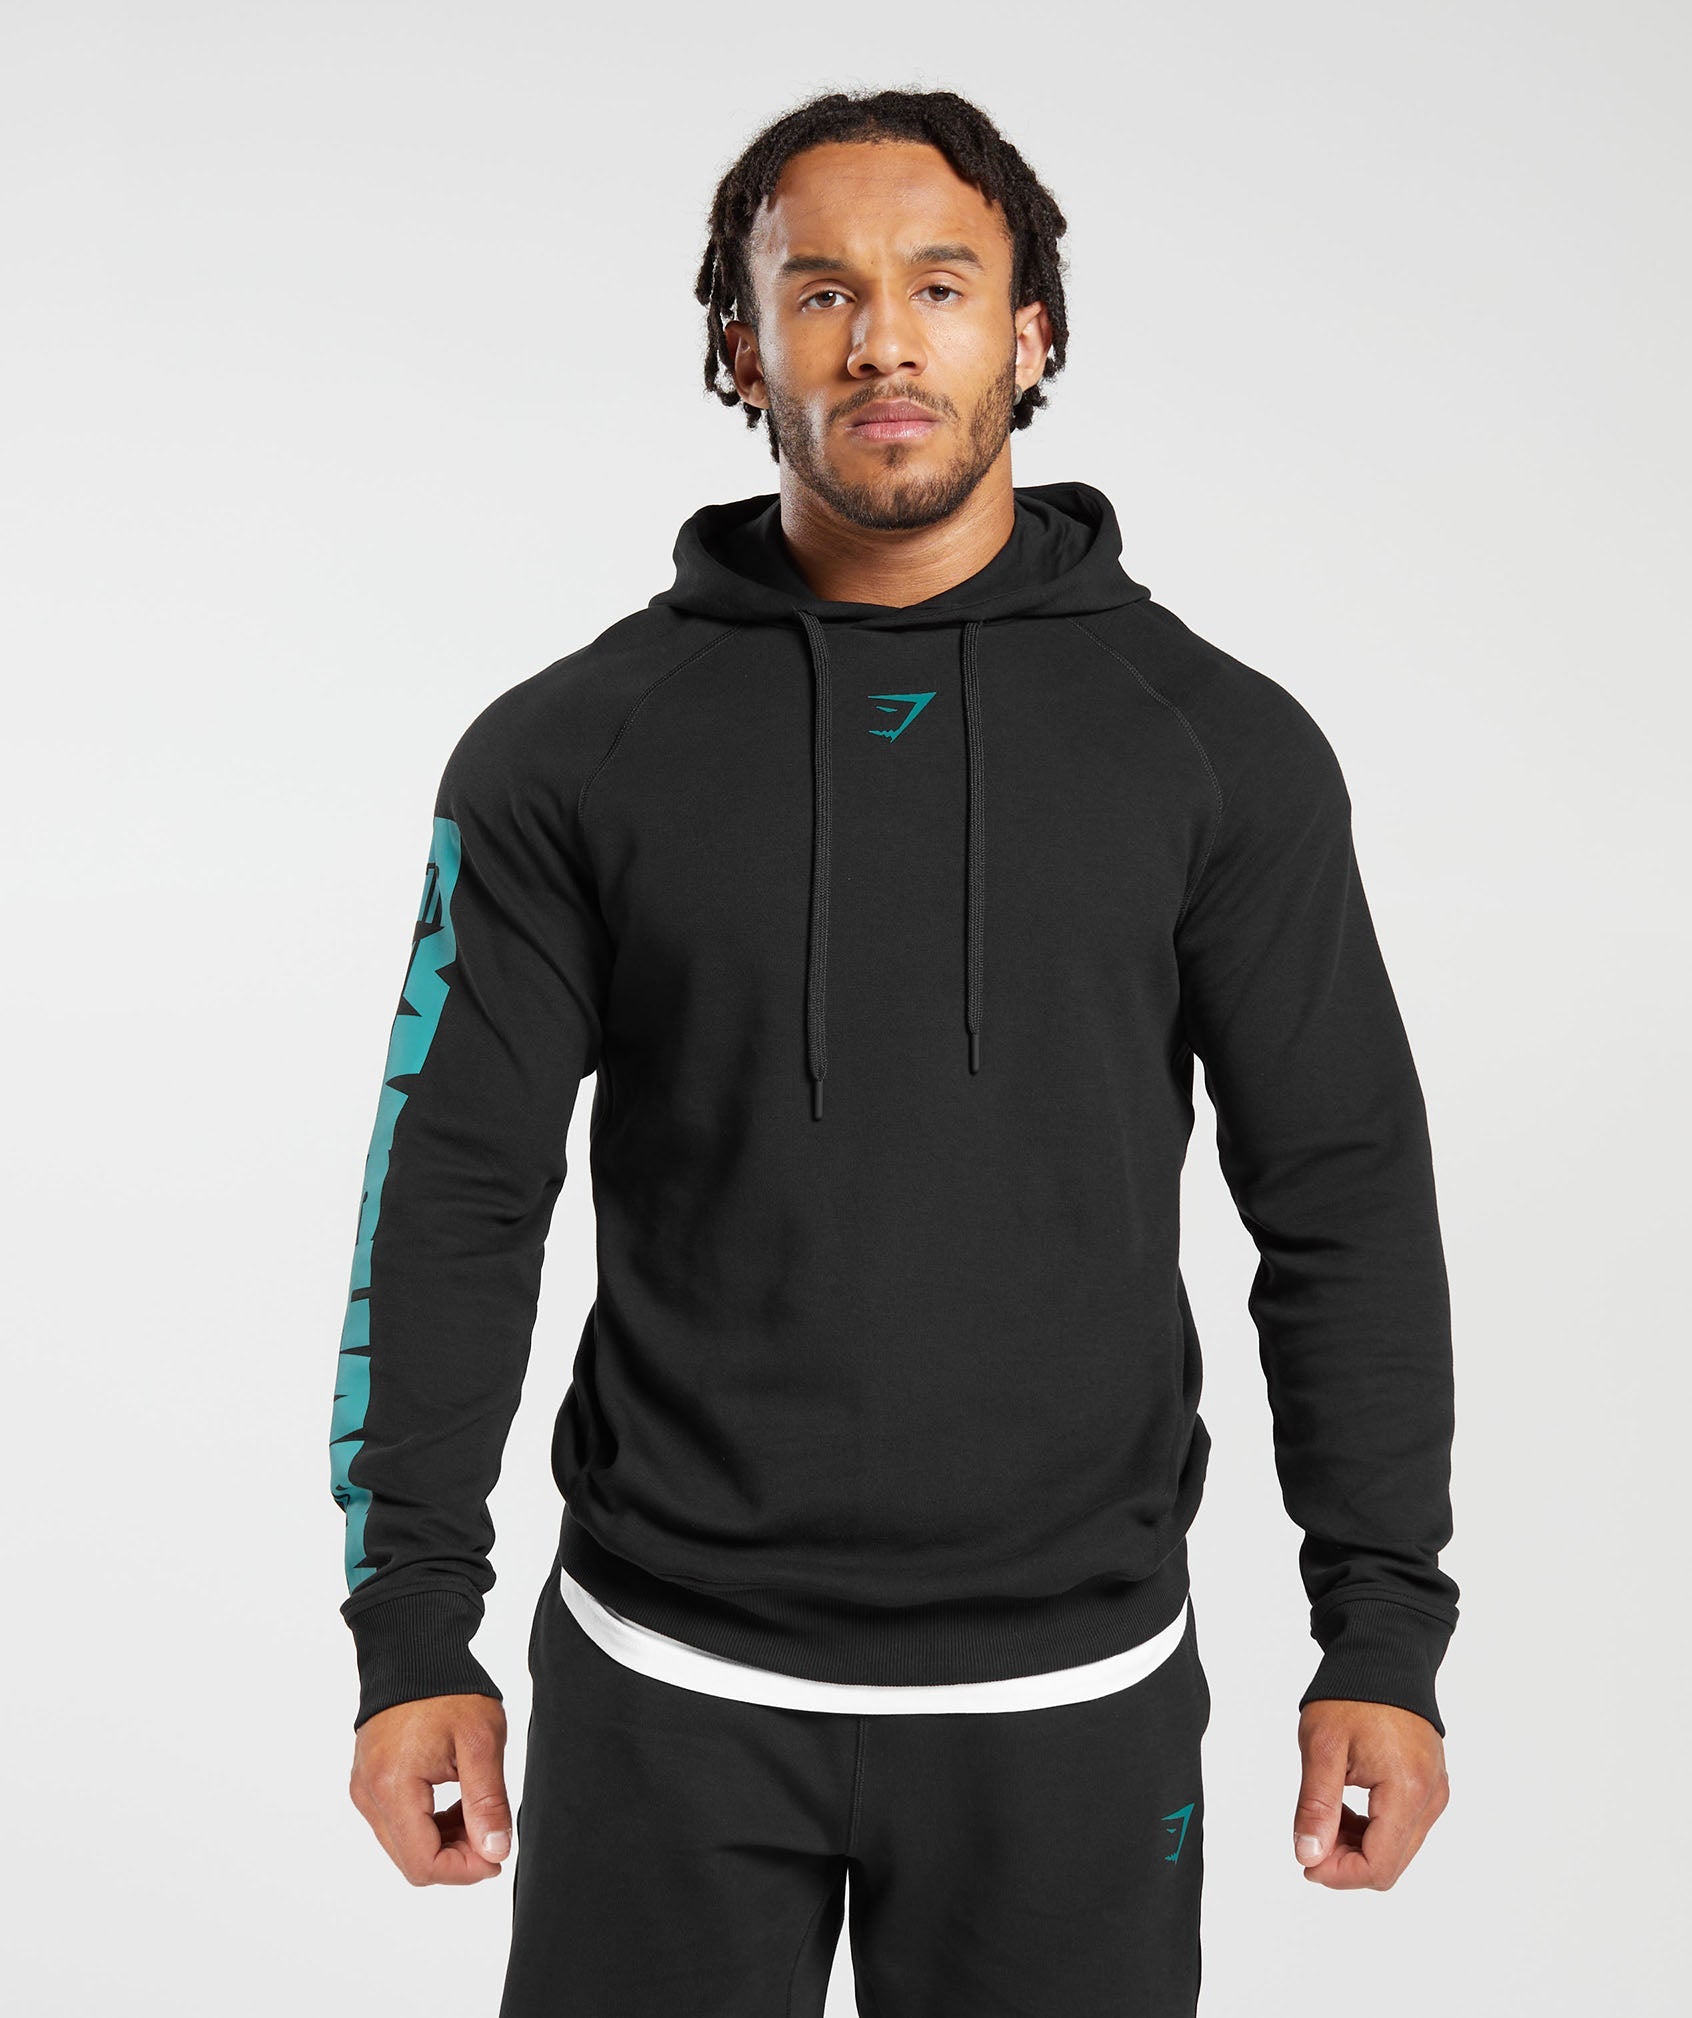 Gifts for Weightlifters - Gift ideas for Men - Gymshark